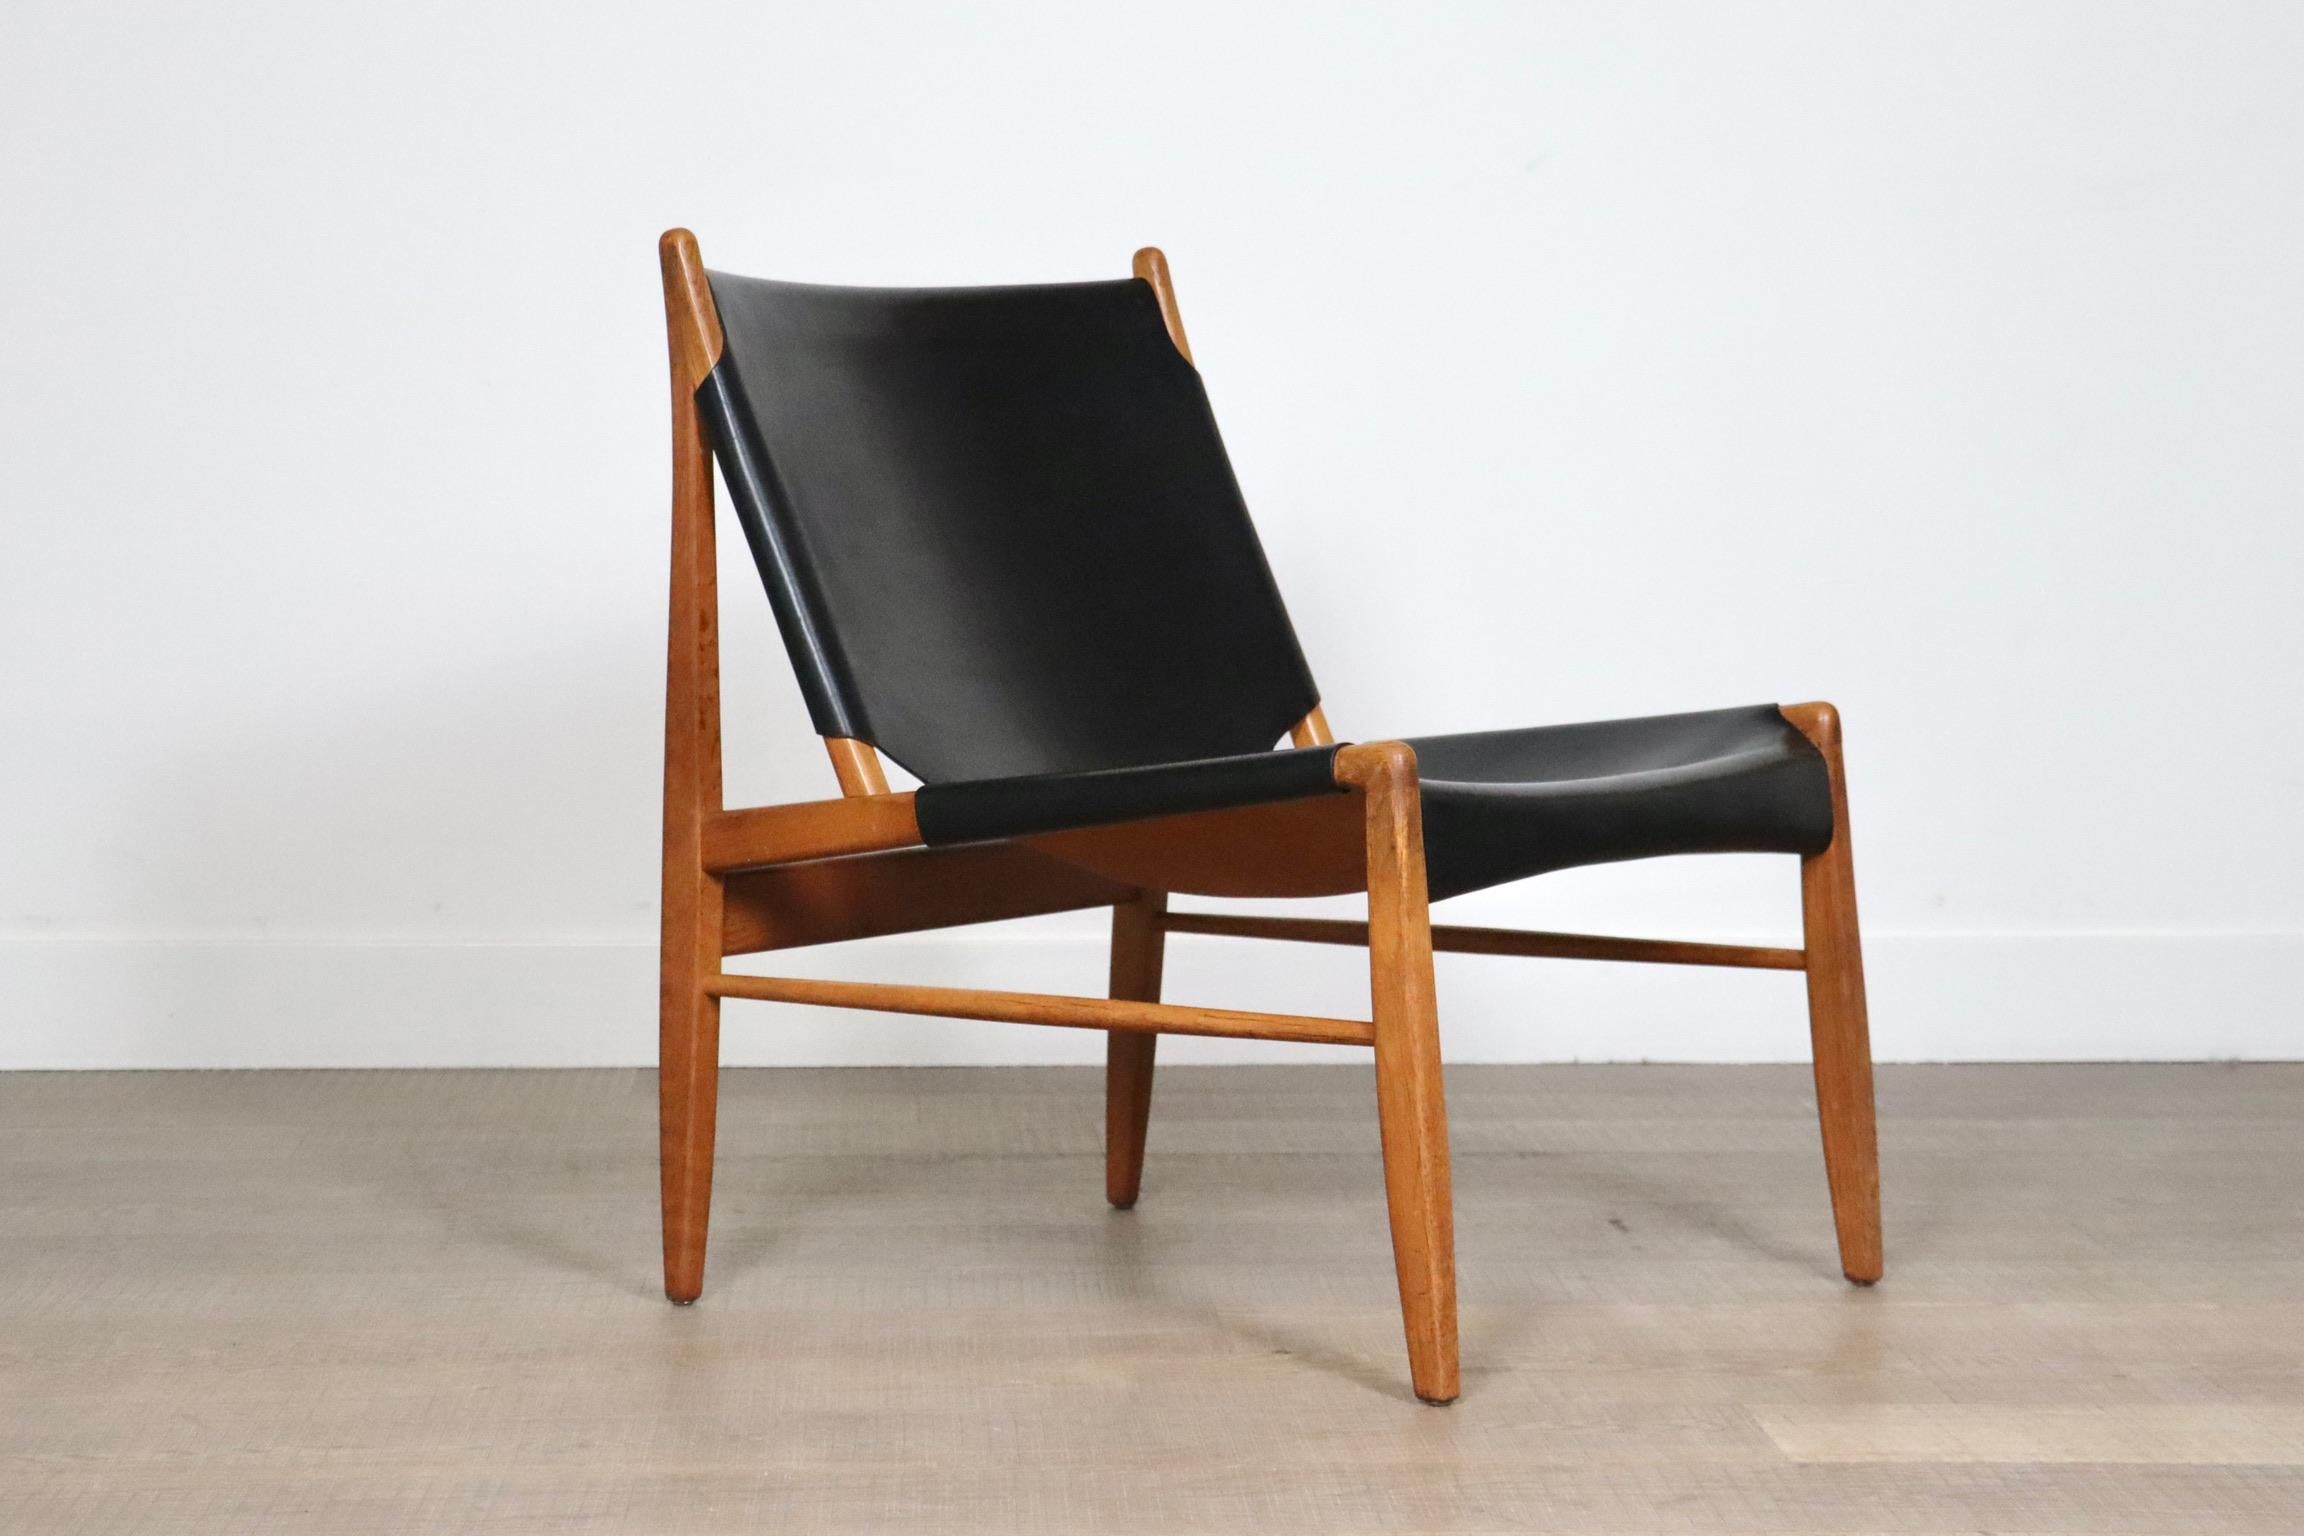 Leather Chimney Lounge Chair Model 1192 By Franz Xaver Lutz For WK Möbel, 1958 For Sale